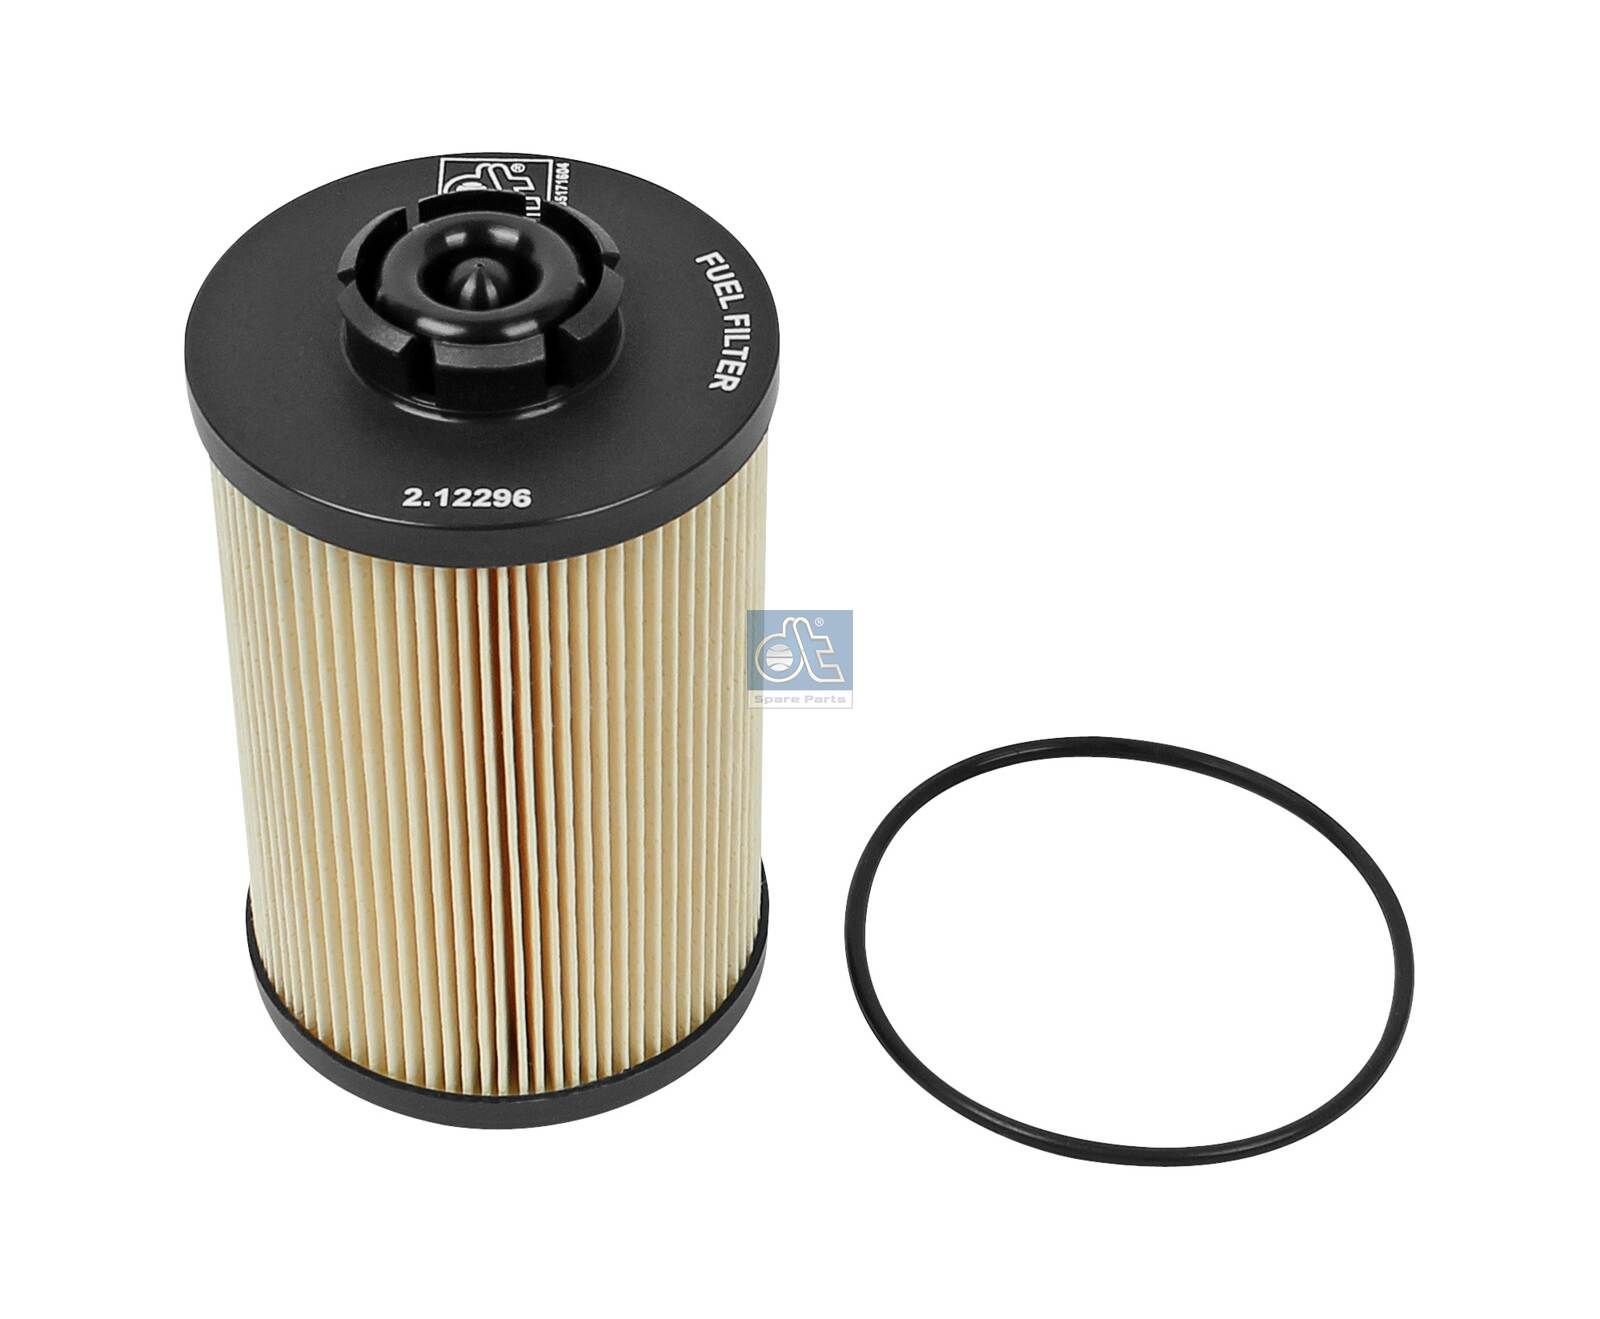 PU 1058X DT Spare Parts 2.12296 Fuel filter 02931712